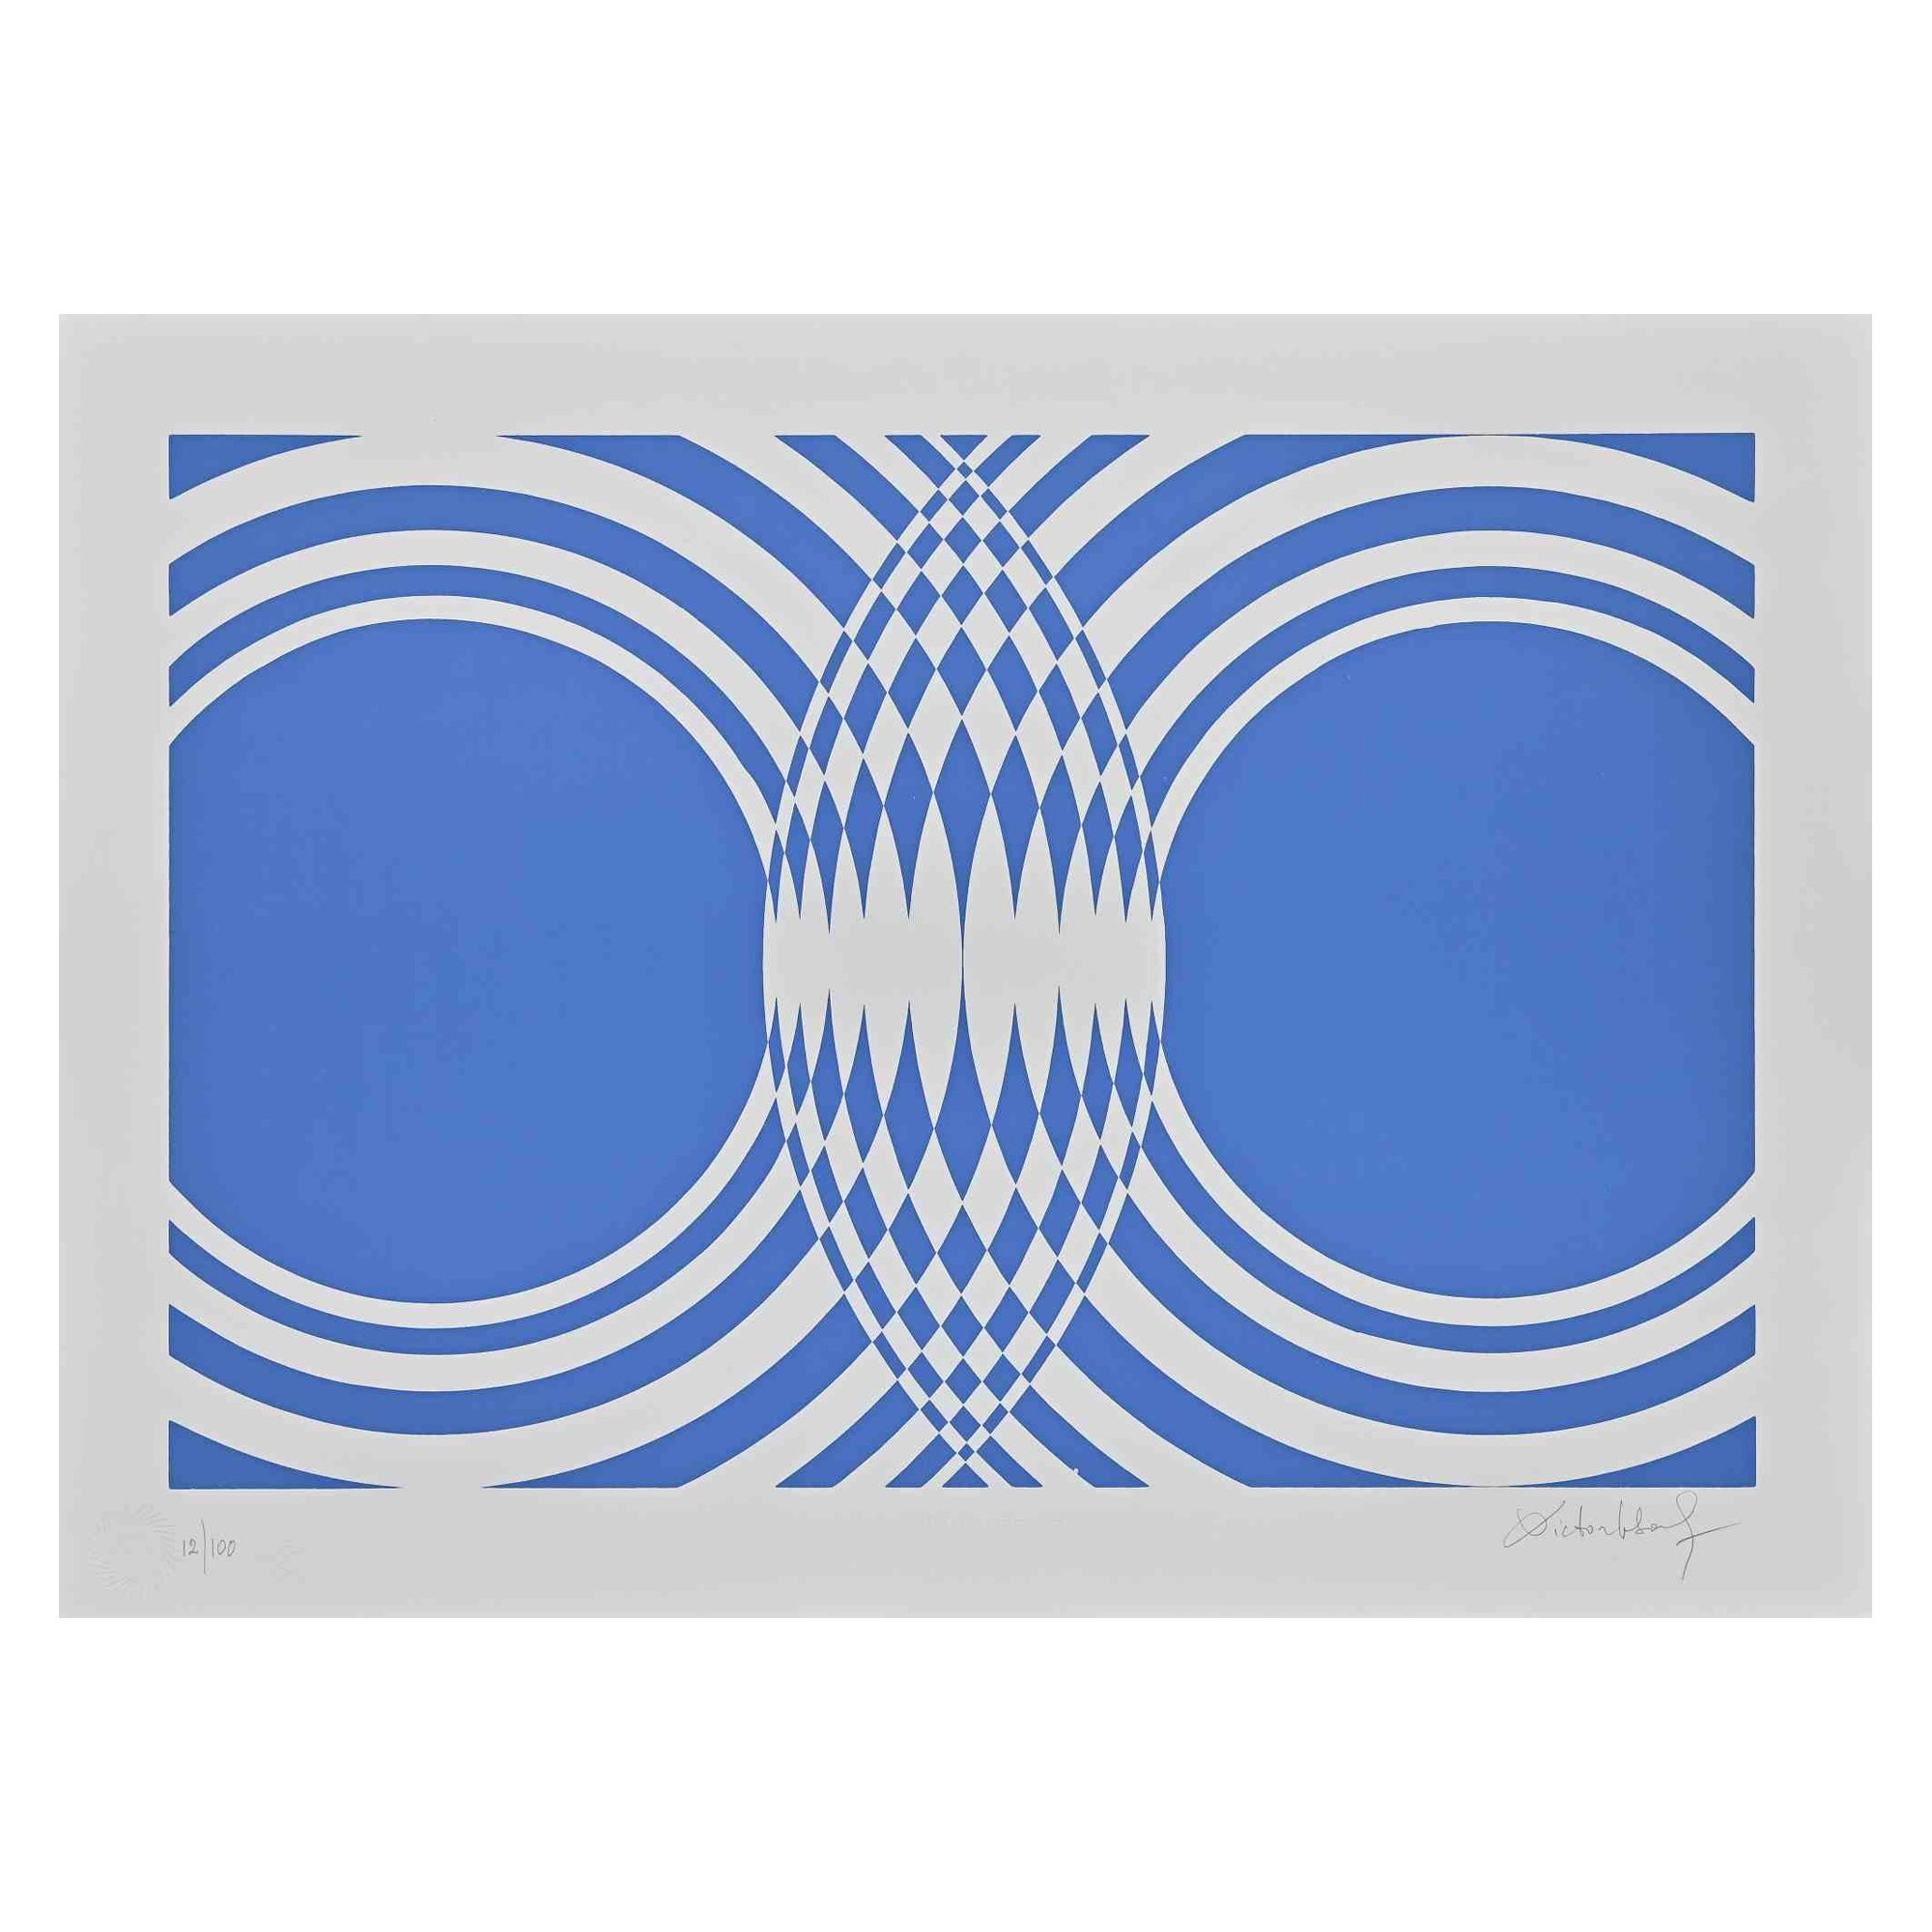 Blue Composition is an original contemporary artwork realized by Victor Debach in the 1970s.

Mixed colored screen print on paper.

Hand signed on the lower right margin.

Numbered on the lower left.

Edition of 12/100.

